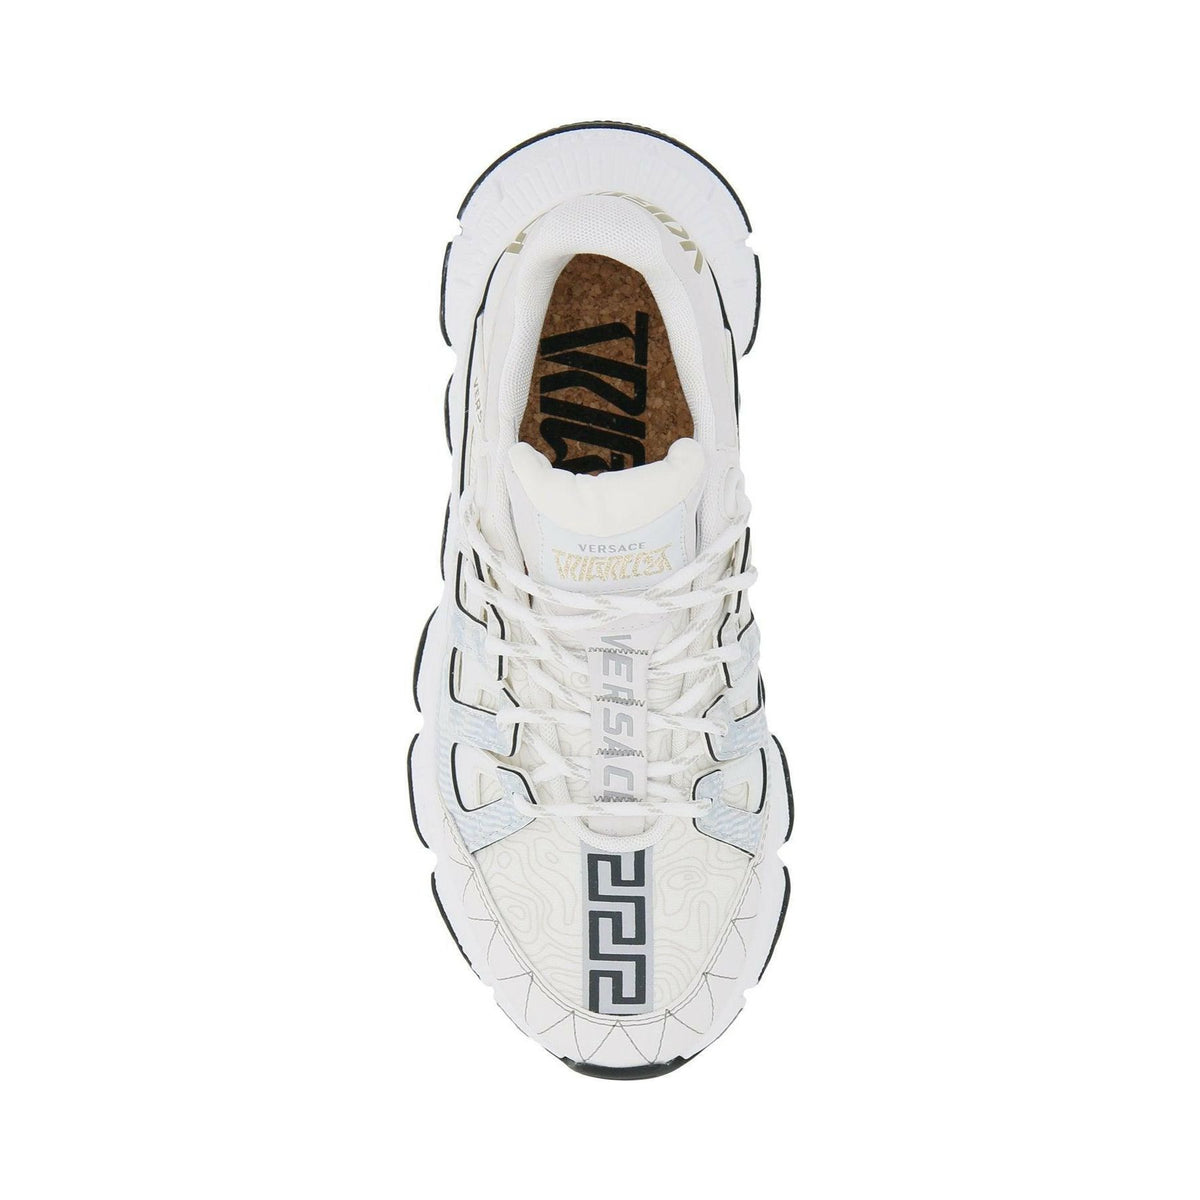 White Gold Multilayer Trigreca Sneakers With Graphic Print VERSACE JOHN JULIA.